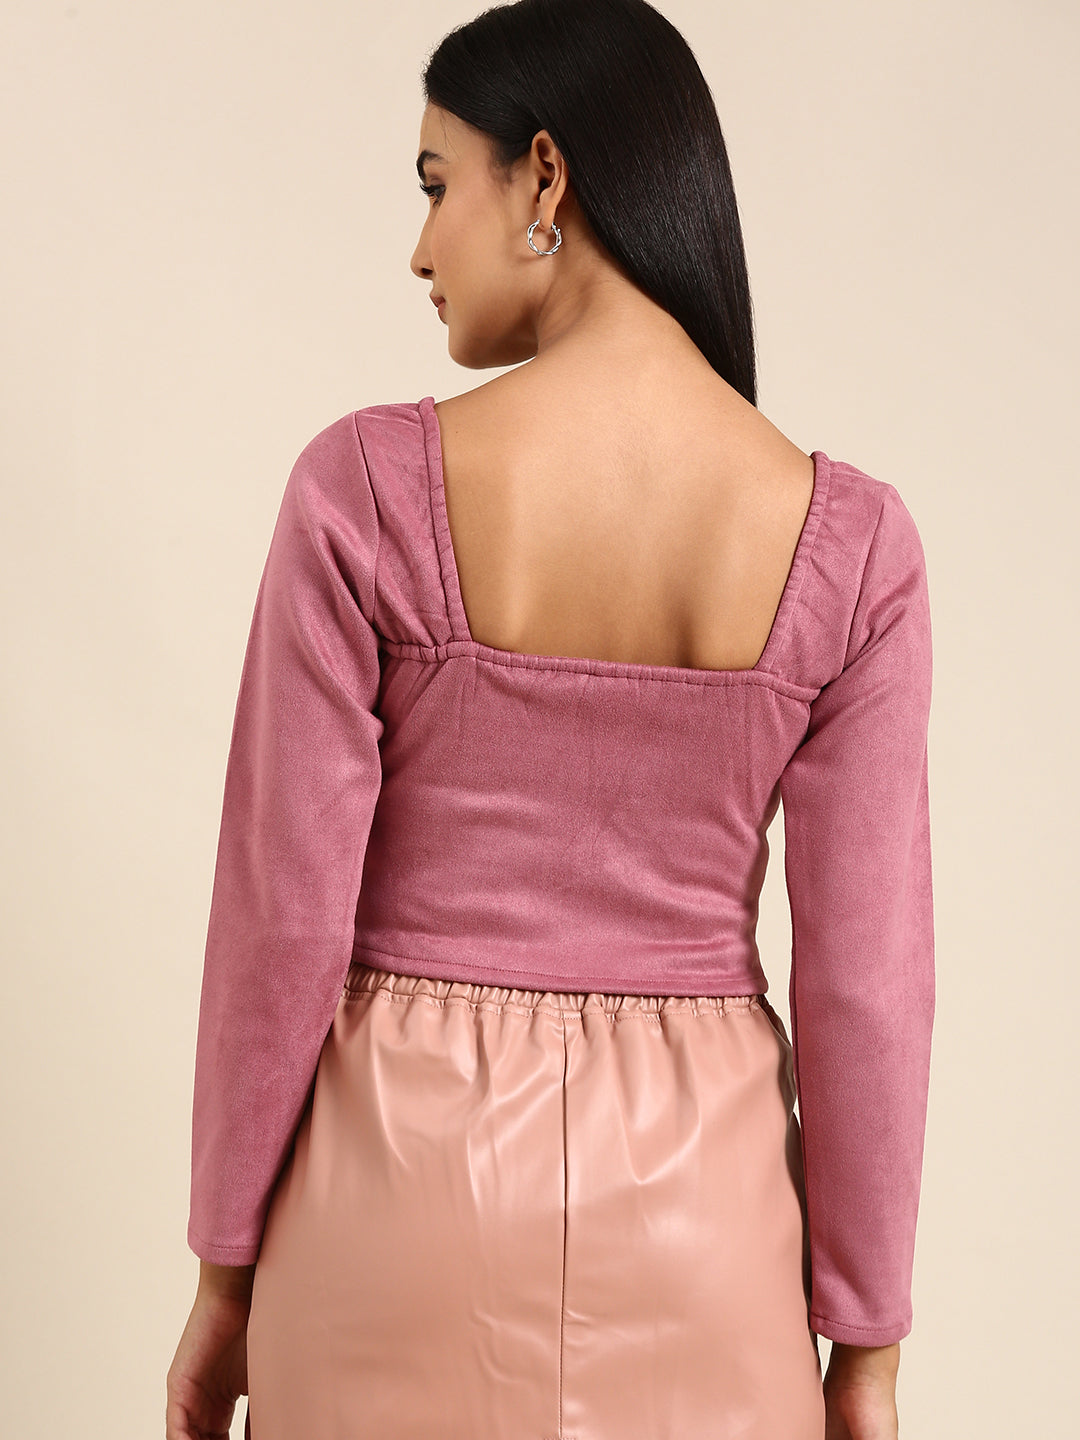 Athena Pink Solid Open-Front Top - Athena Lifestyle